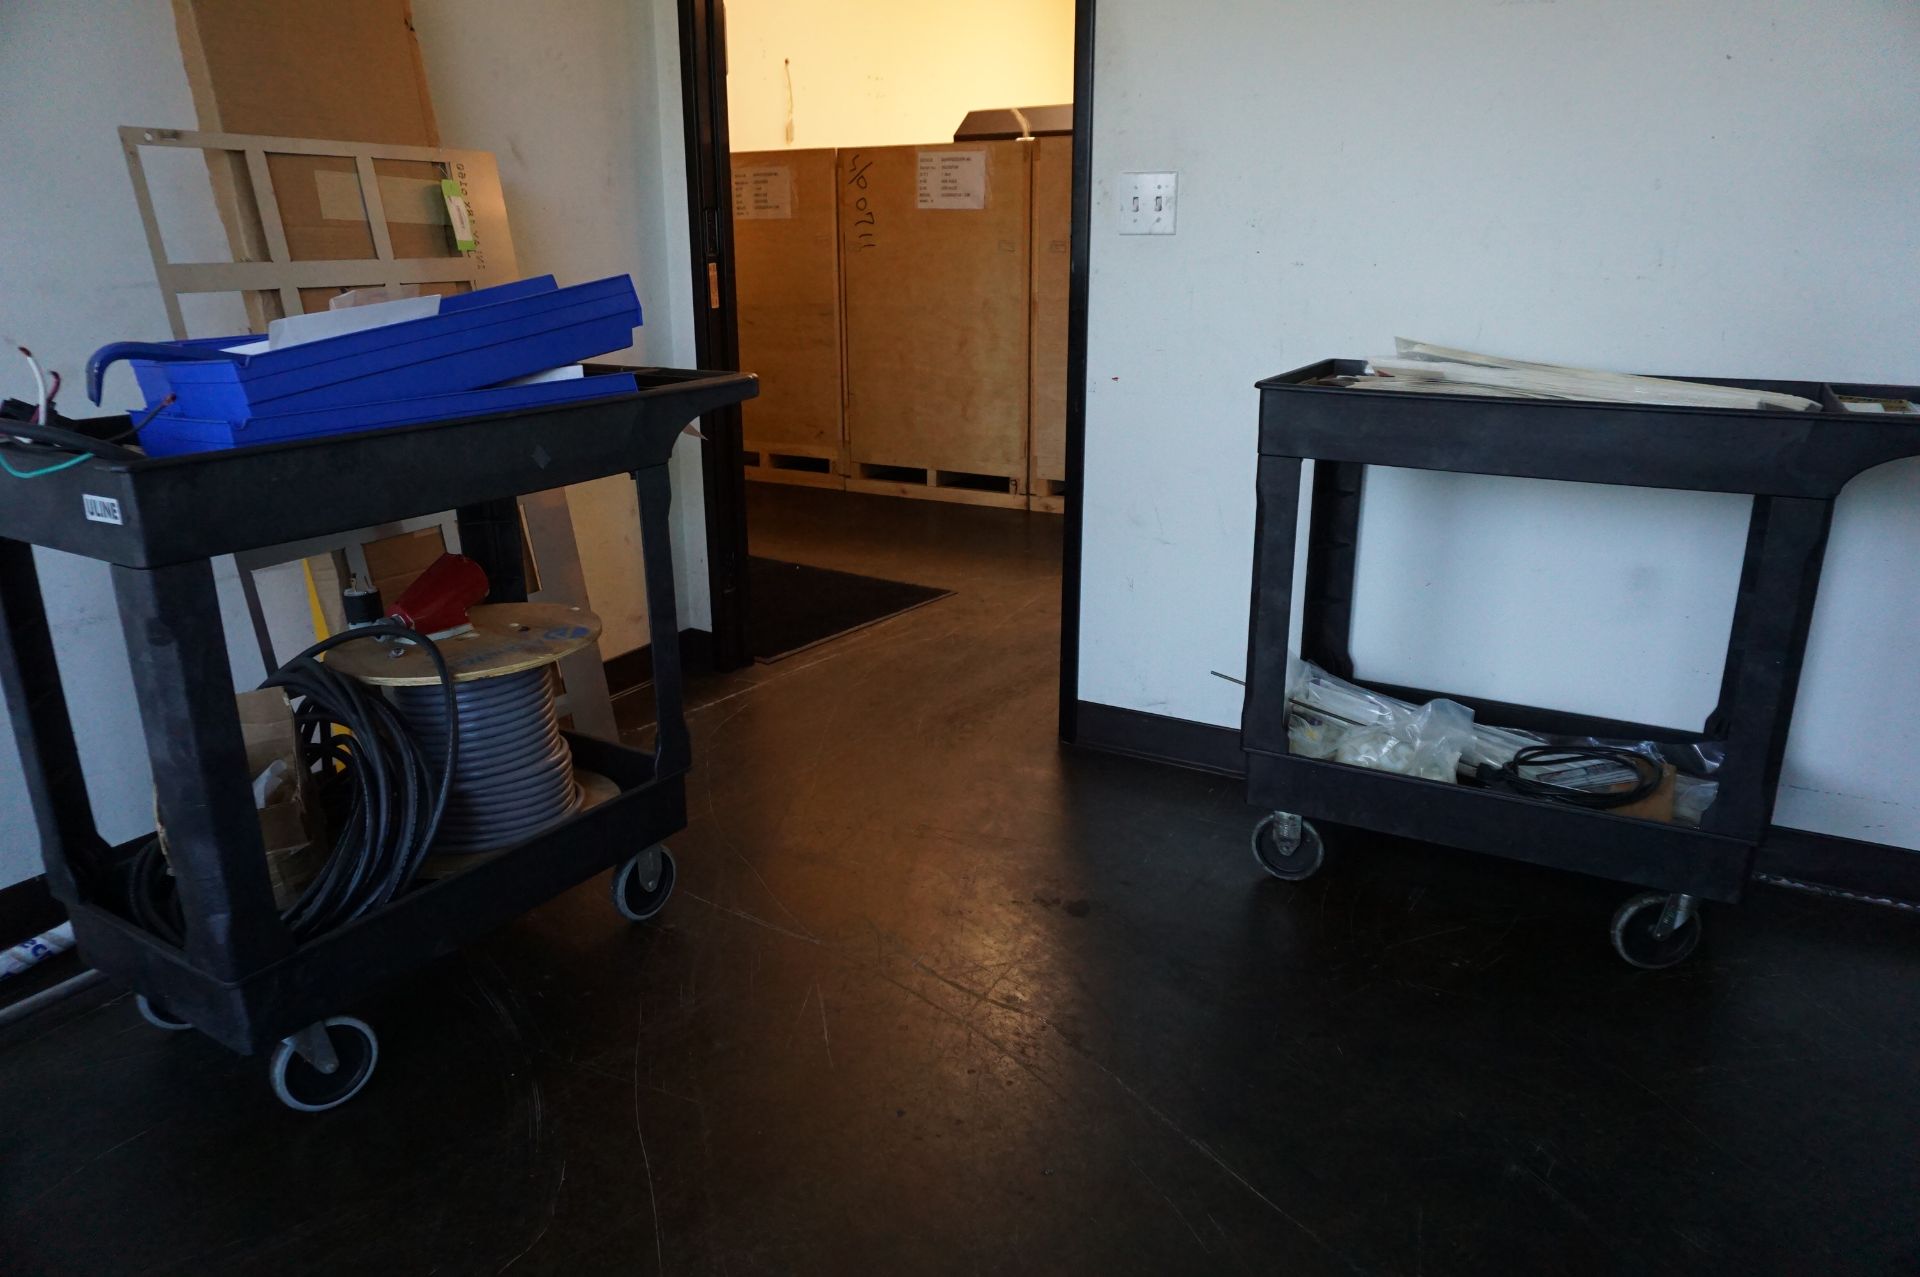 TABLE AND CARTS IN MAINTENANCE ROOM TO INCLUDE: (1) HEAVY DUTY WORK BENCH WOOD TOP STEEL LEGS, 72" X - Image 2 of 4